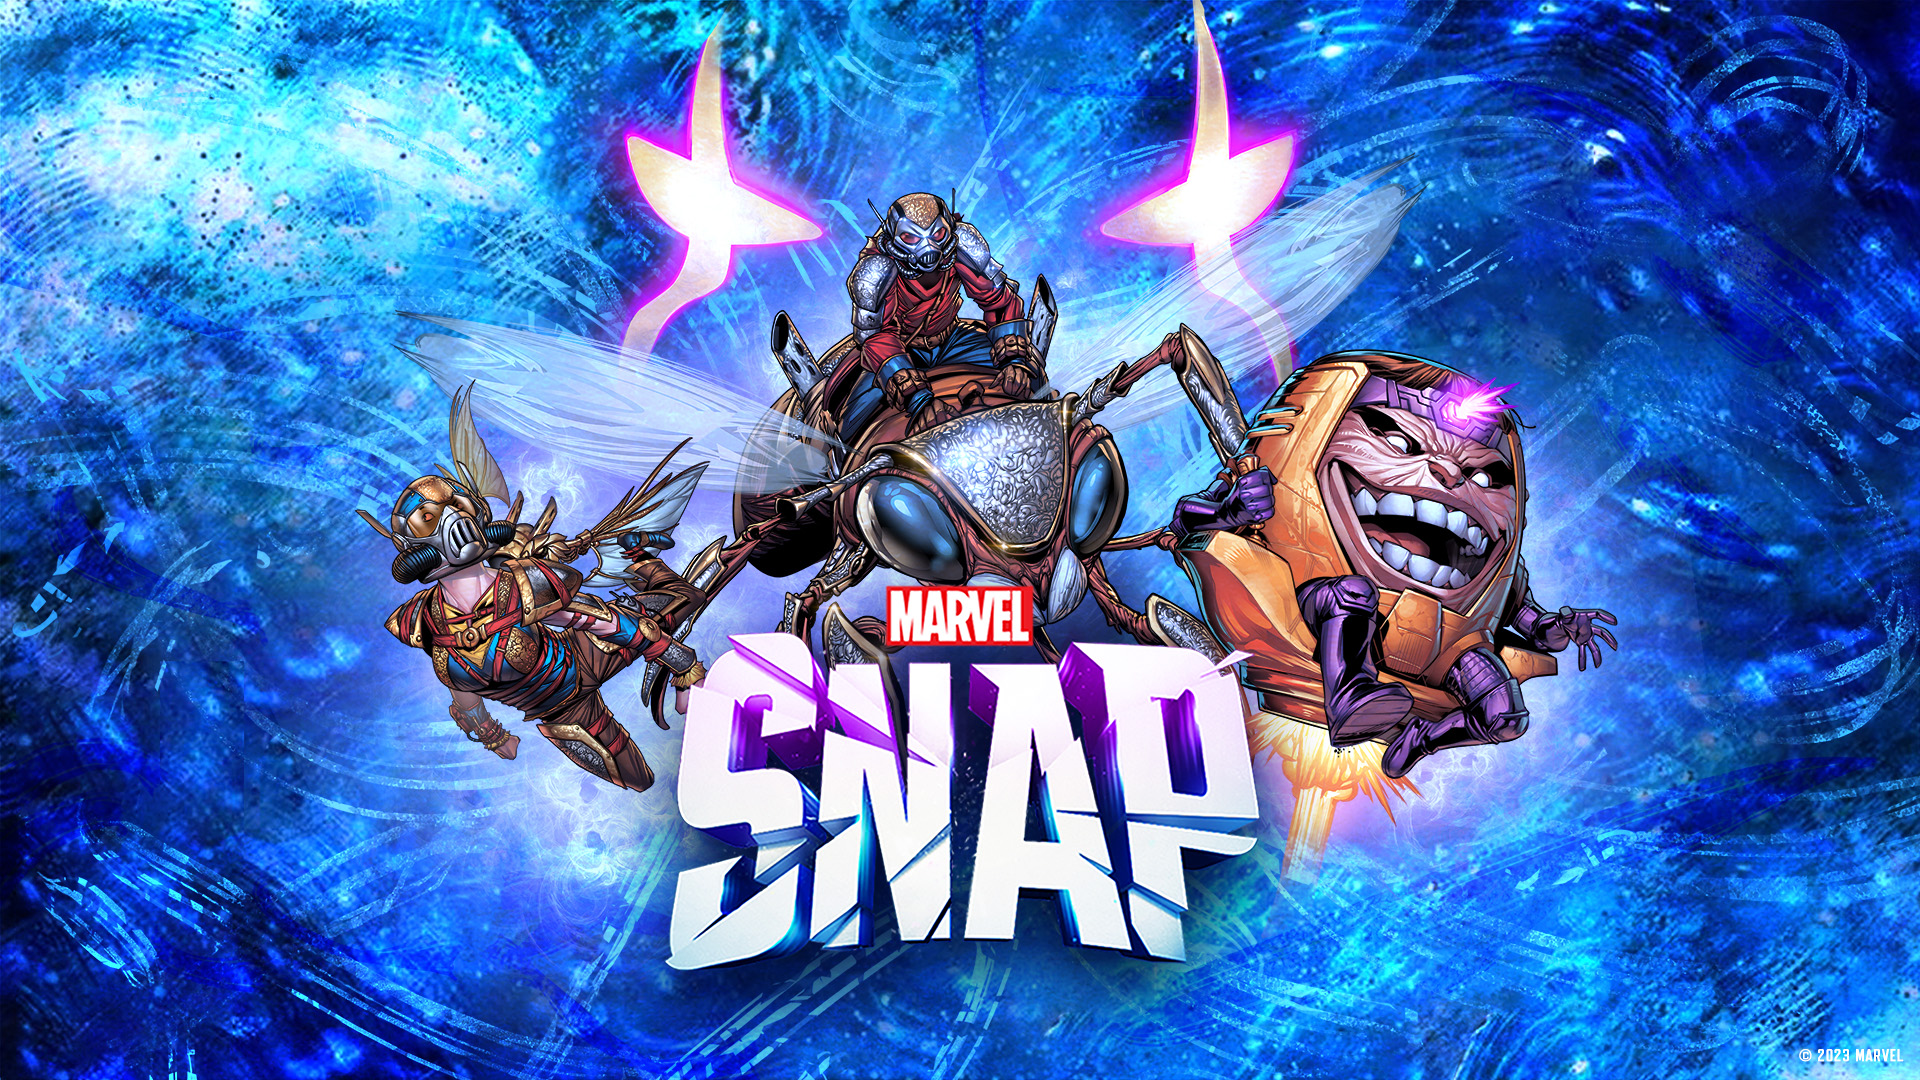 MARVEL SNAP - Dominate the Marvel Multiverse in High-Speed Card